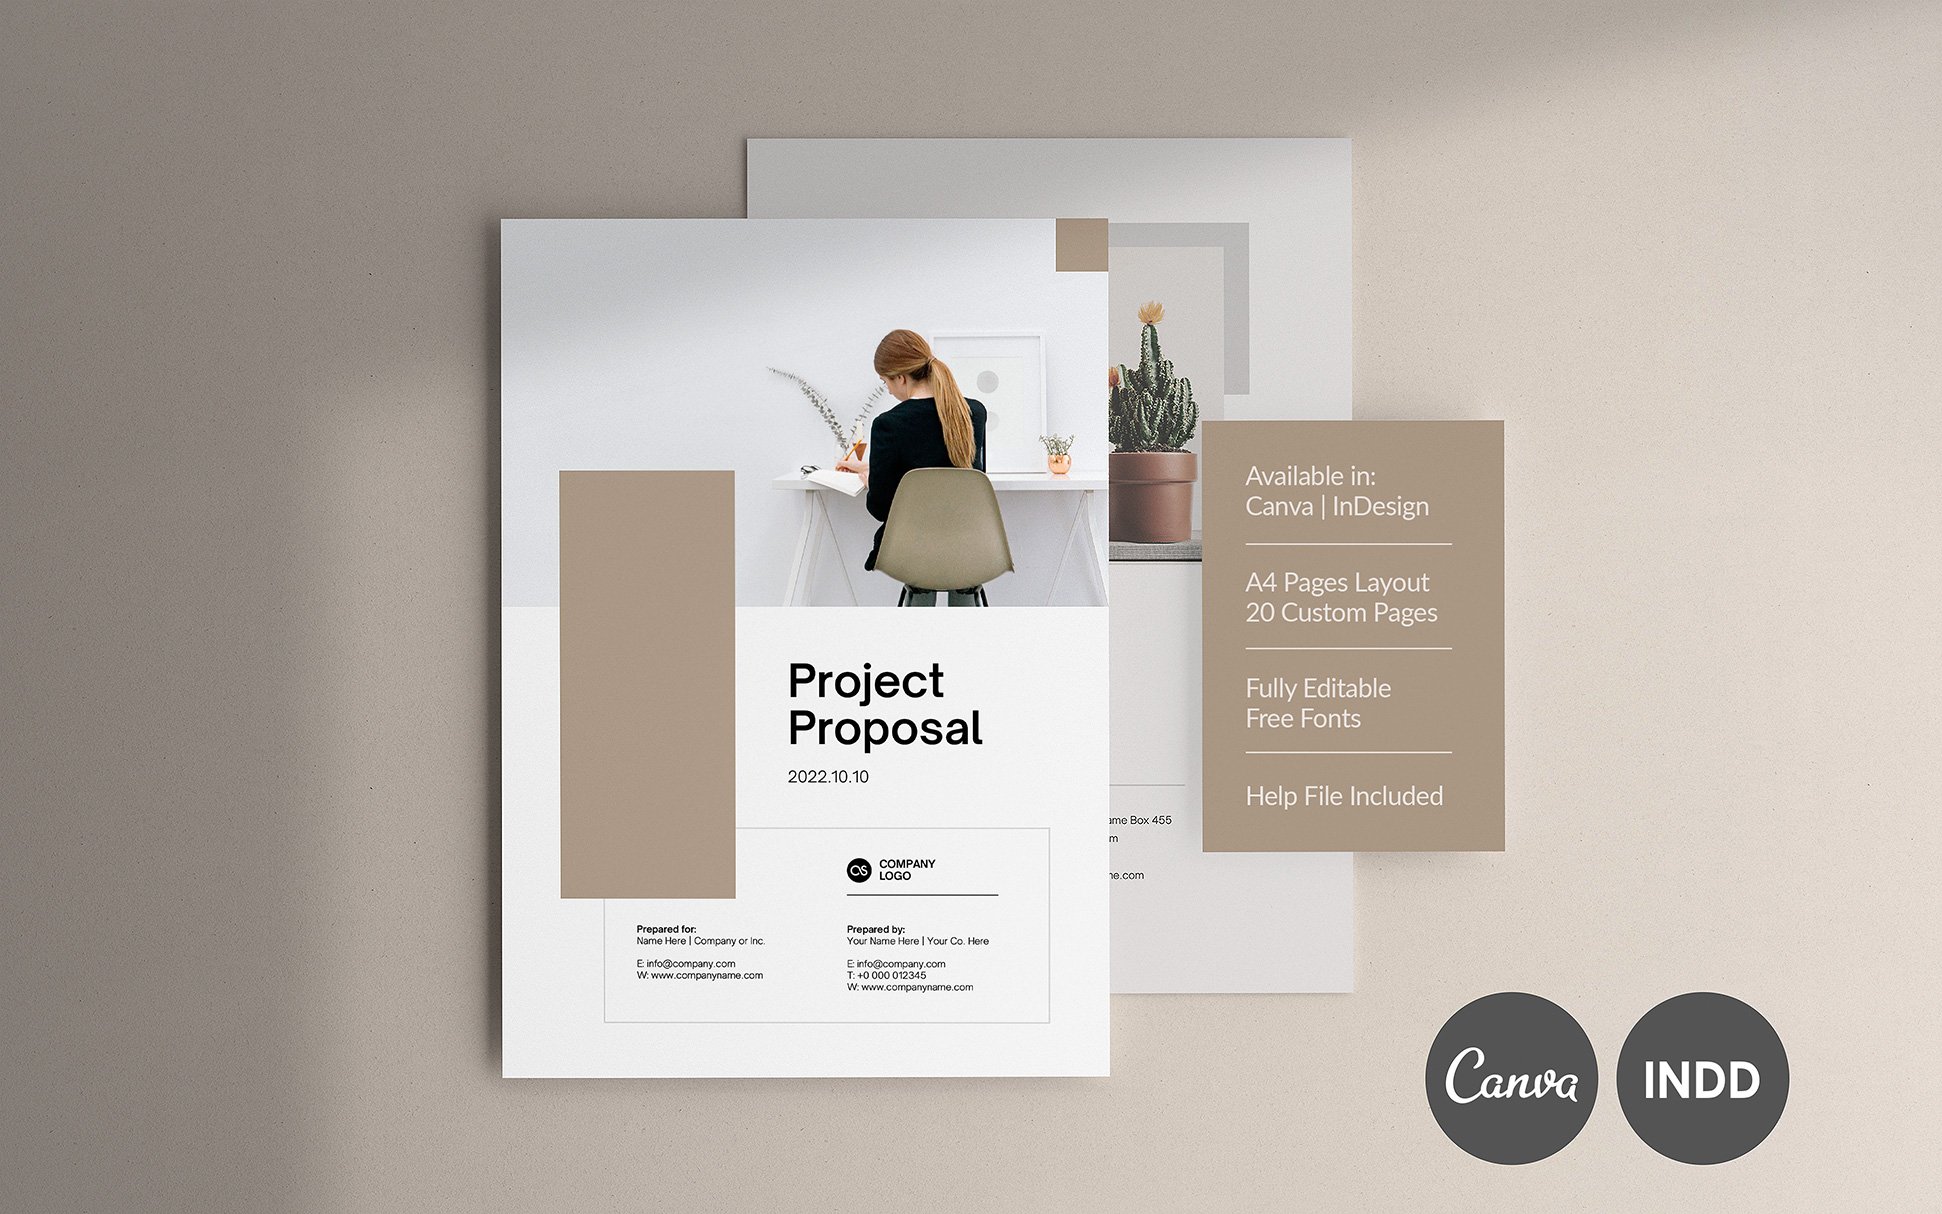 Project Proposal - Canva cover image.